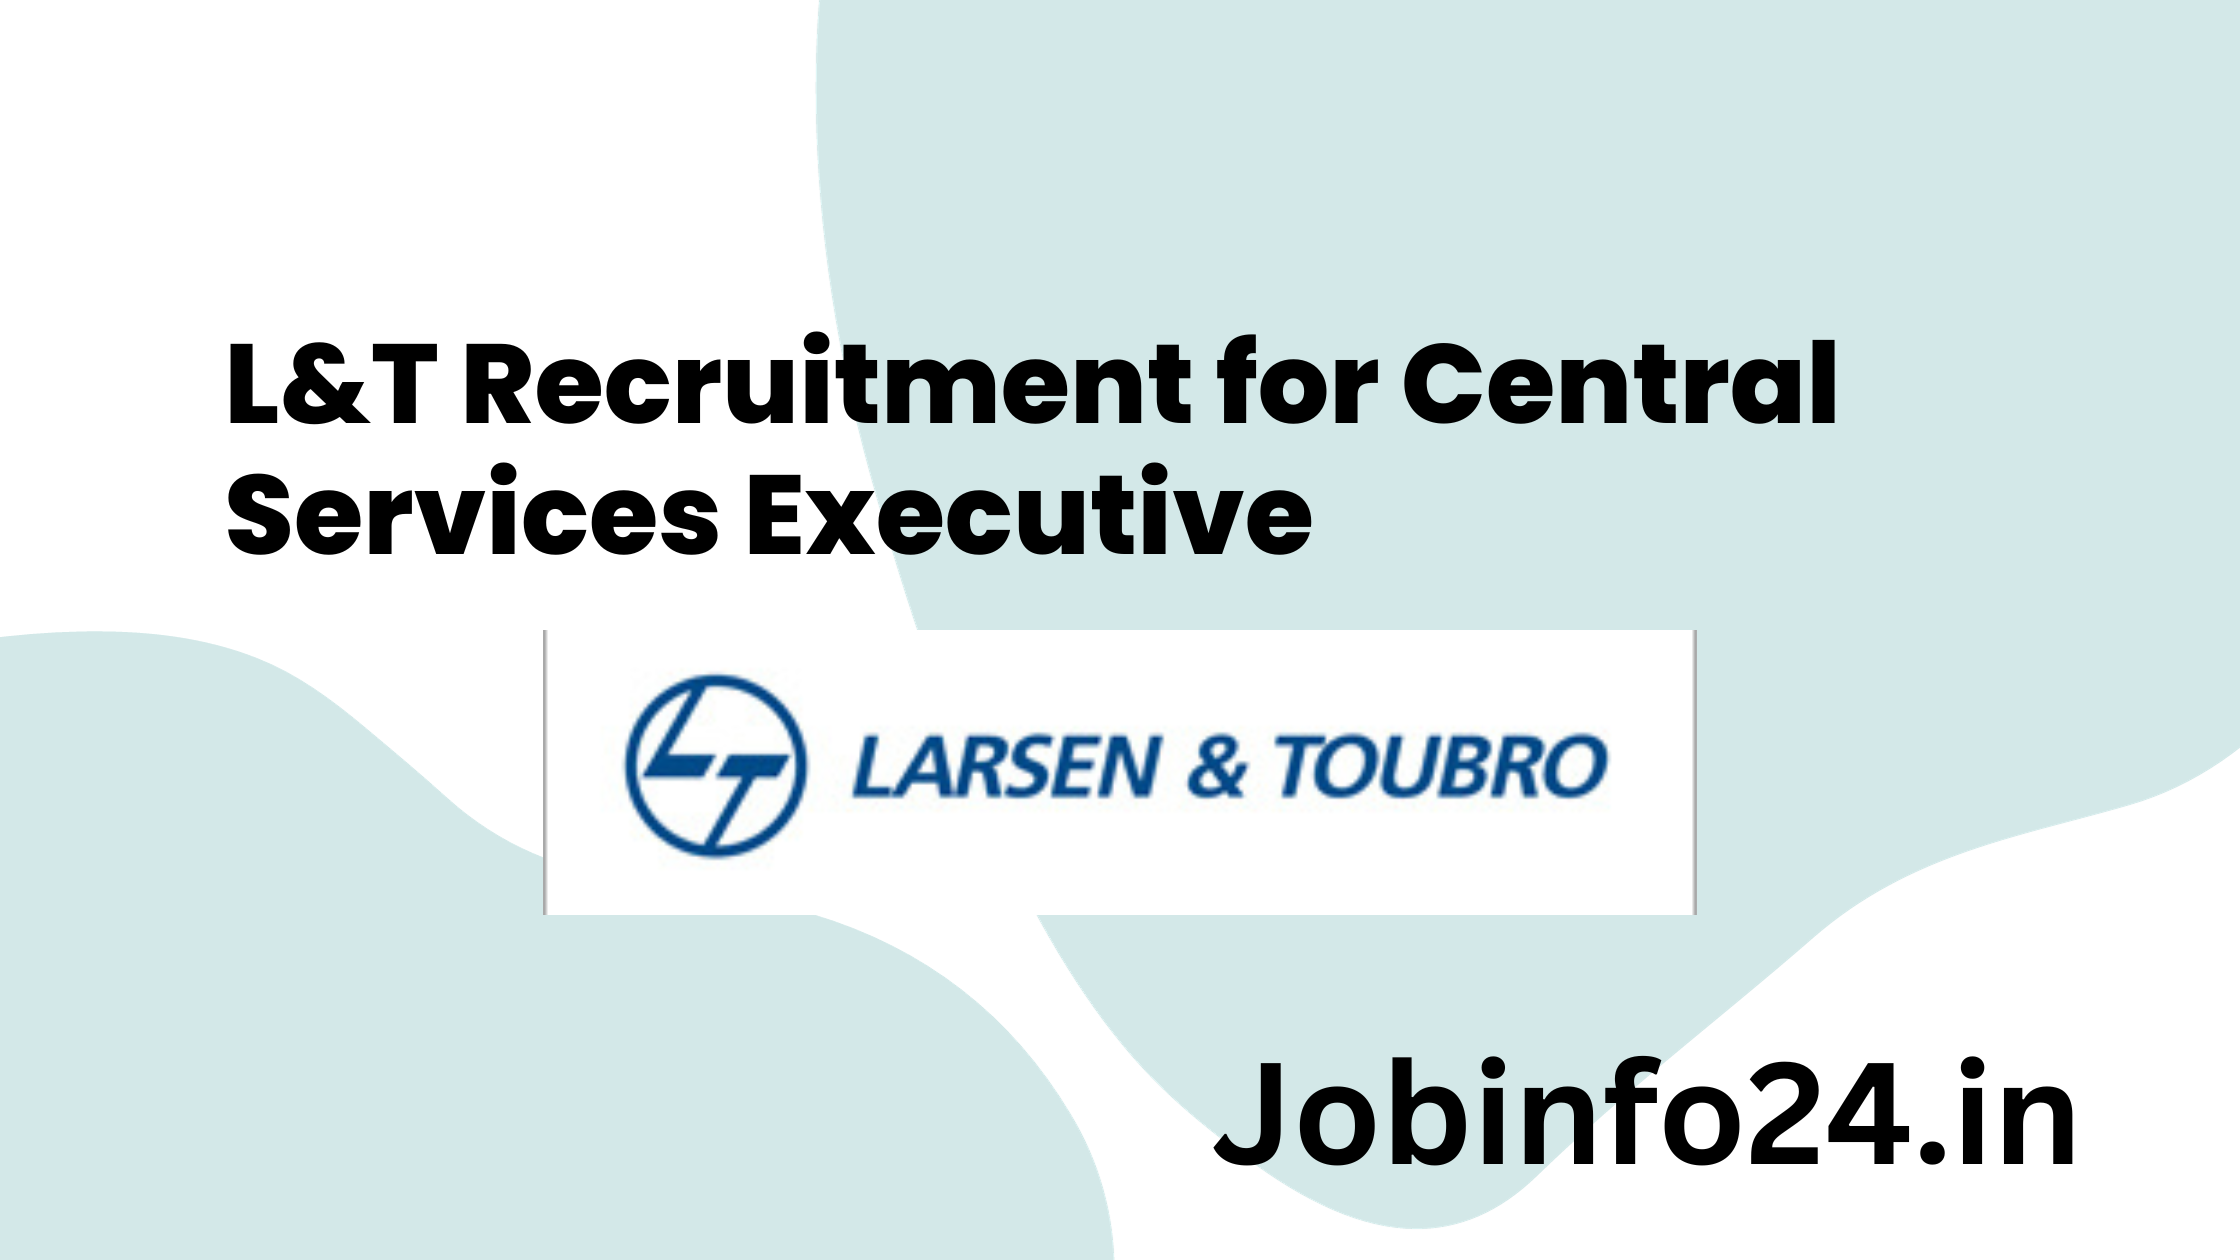 L&T Recruitment for Central Services Executive